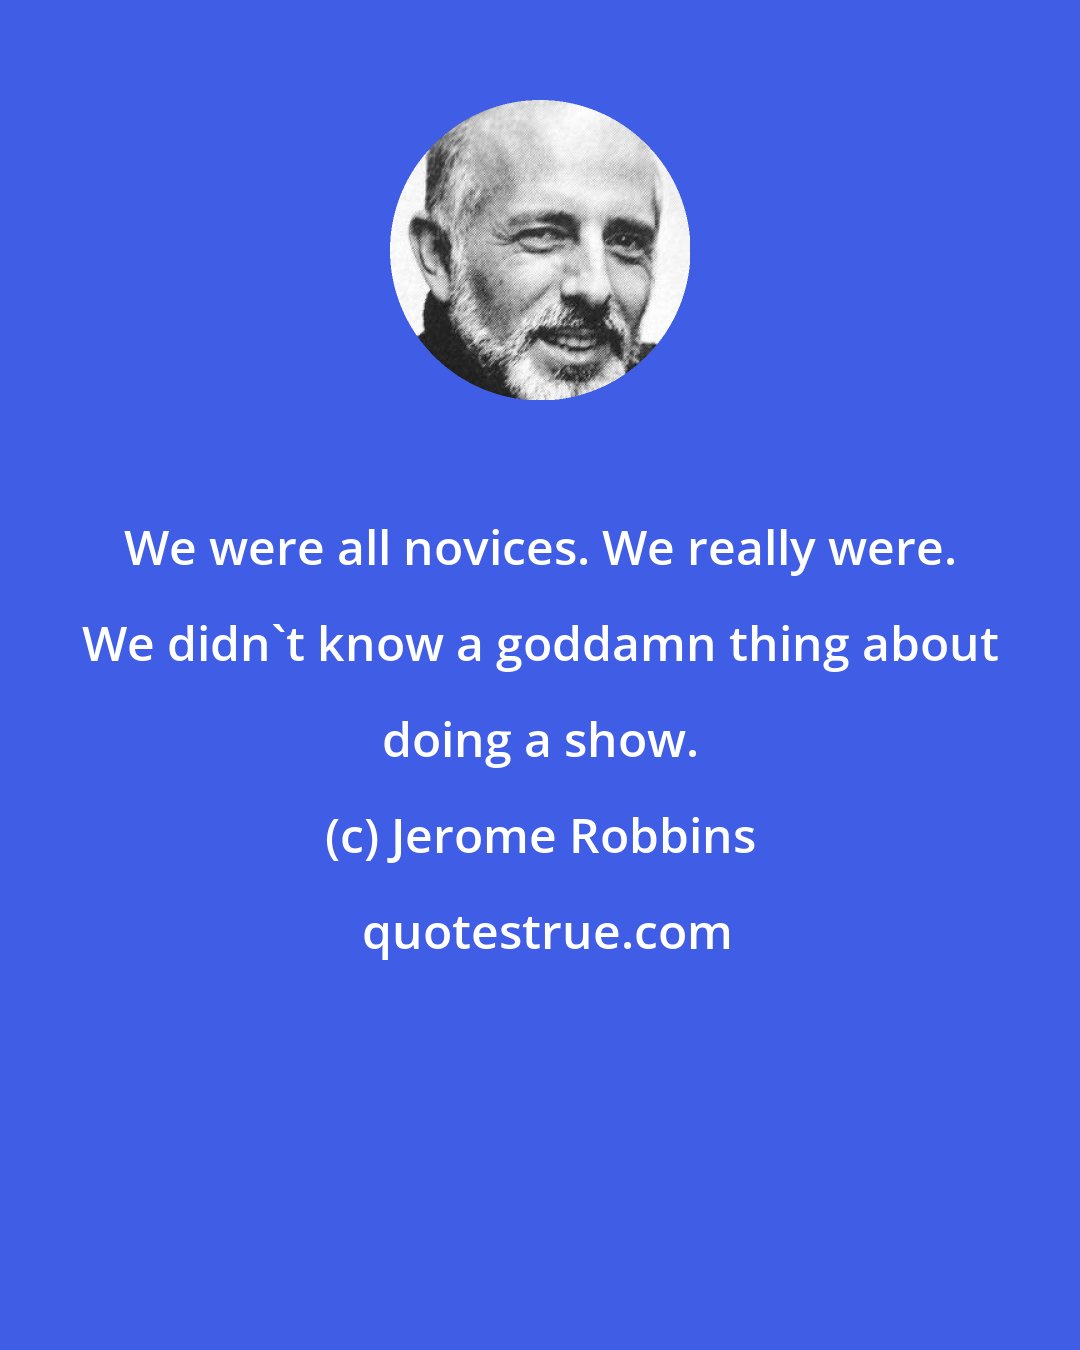 Jerome Robbins: We were all novices. We really were. We didn't know a goddamn thing about doing a show.